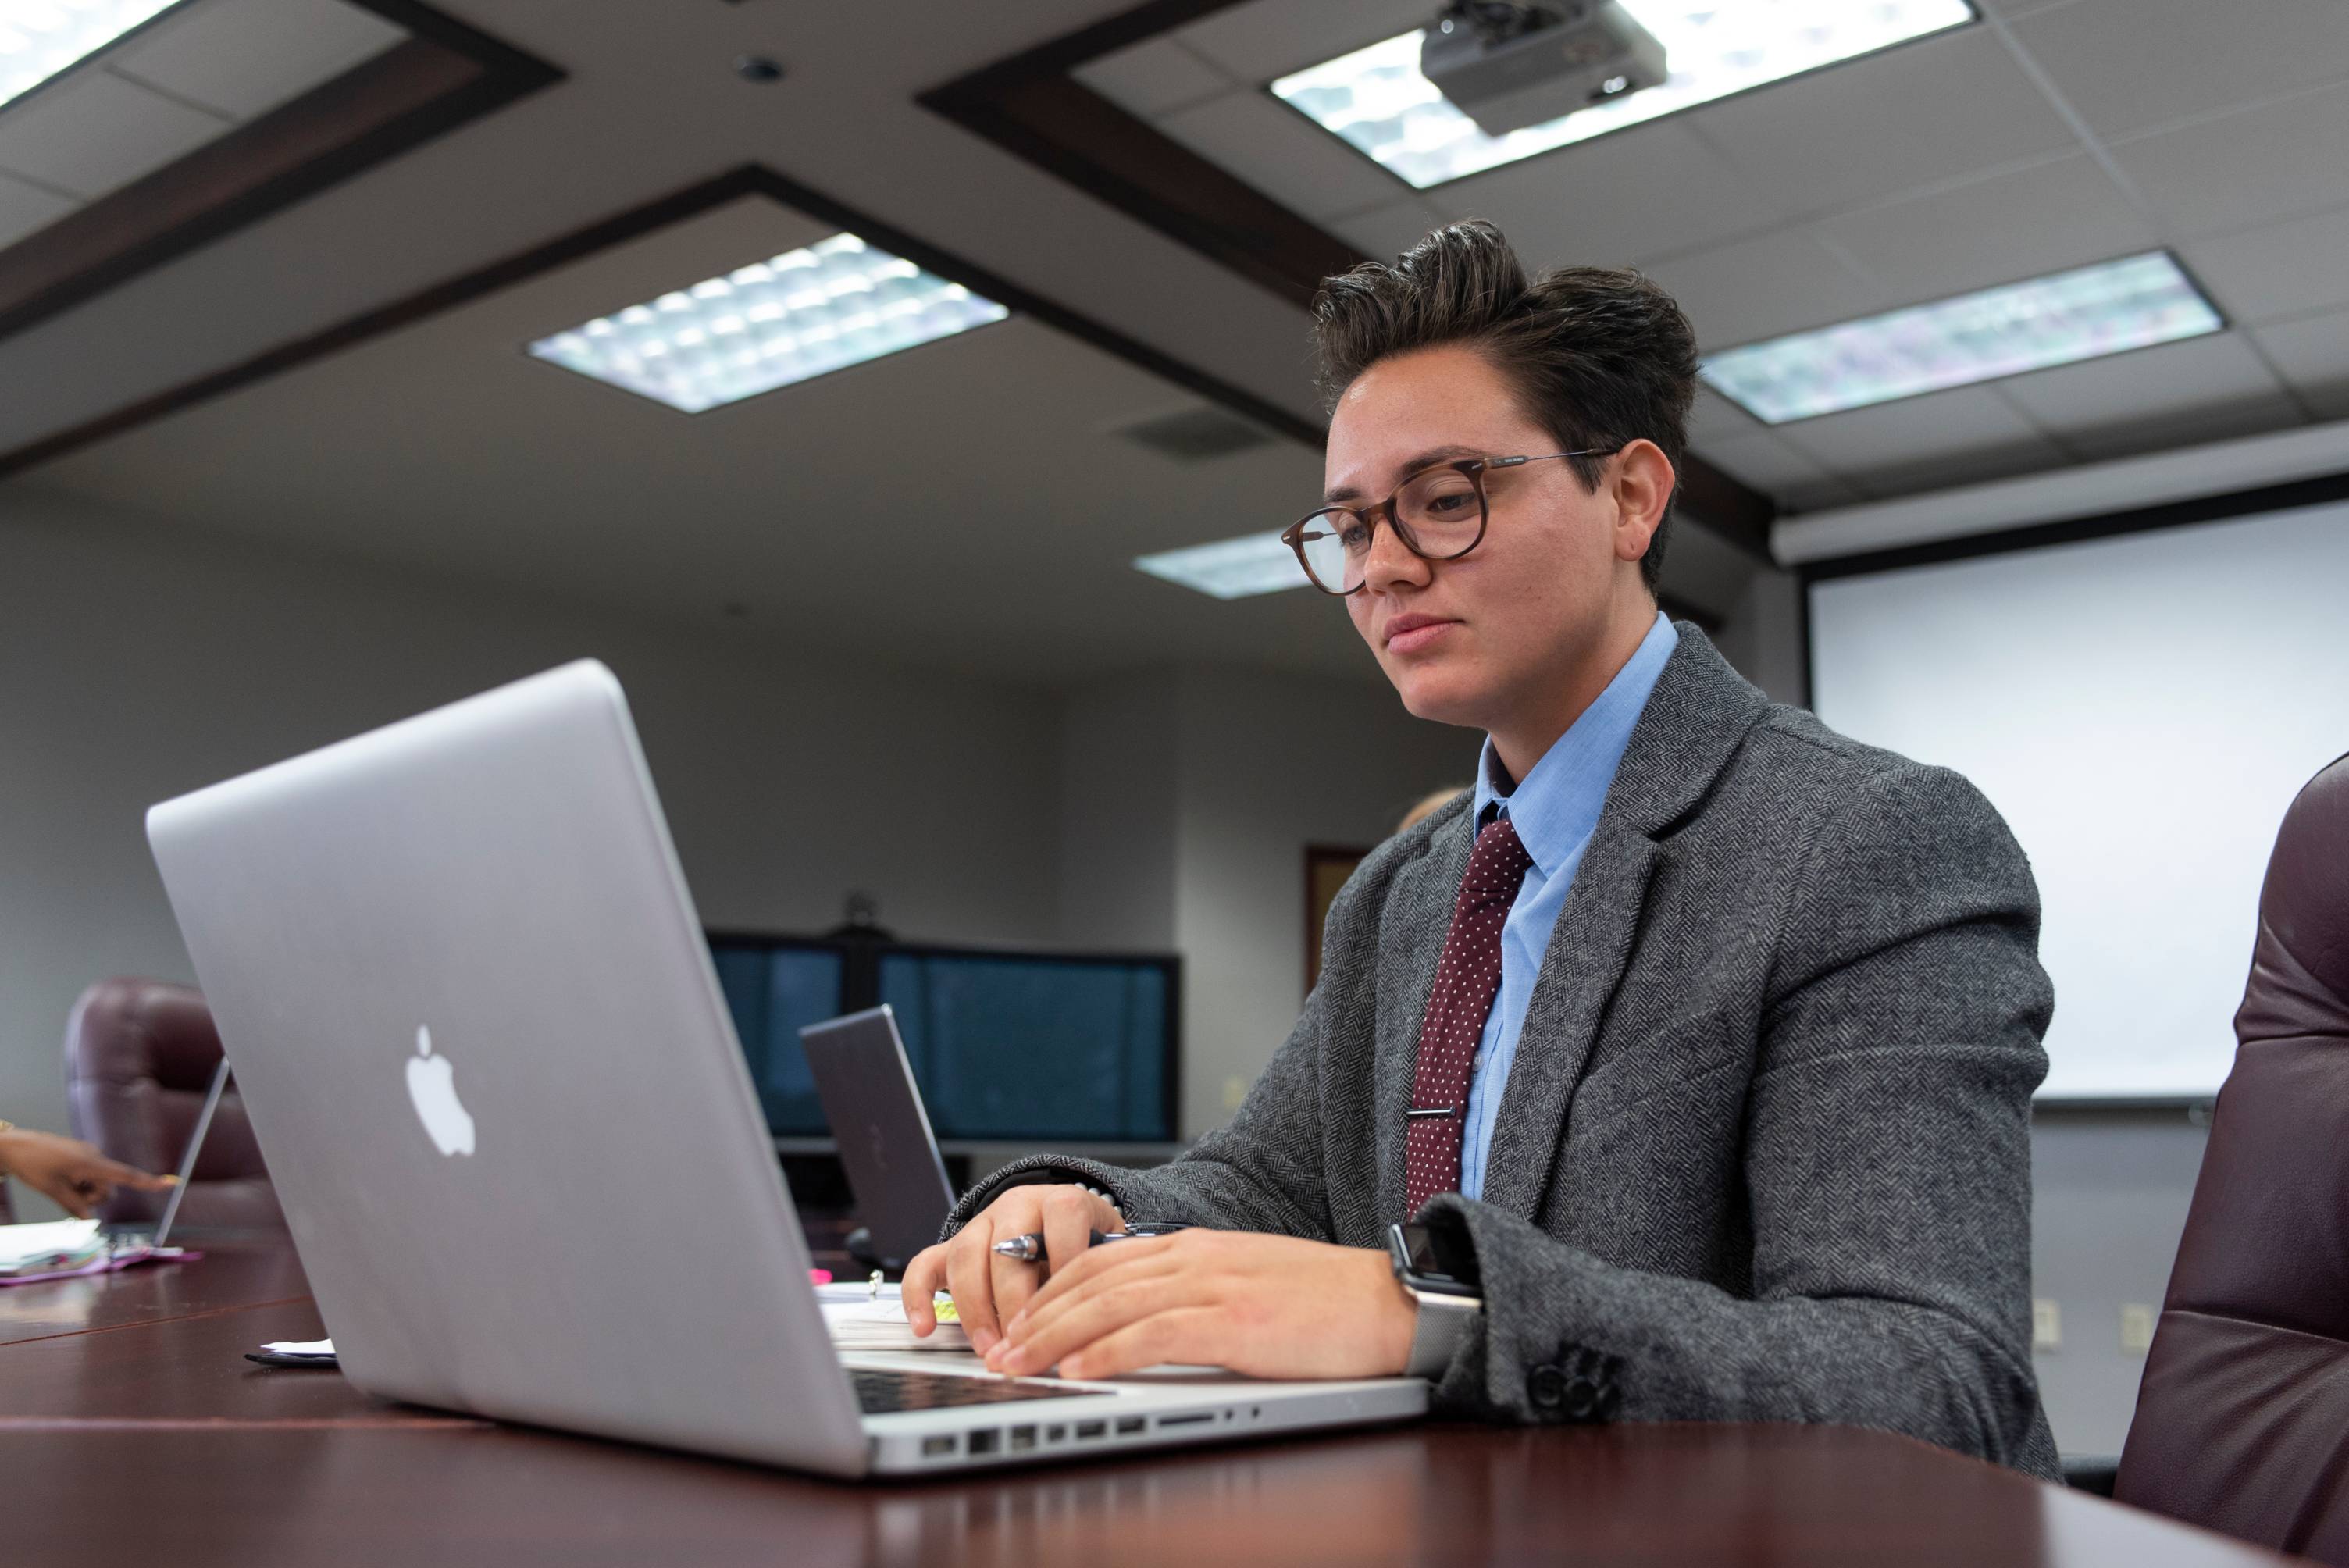 a person typing on their laptop wearing professional clothes